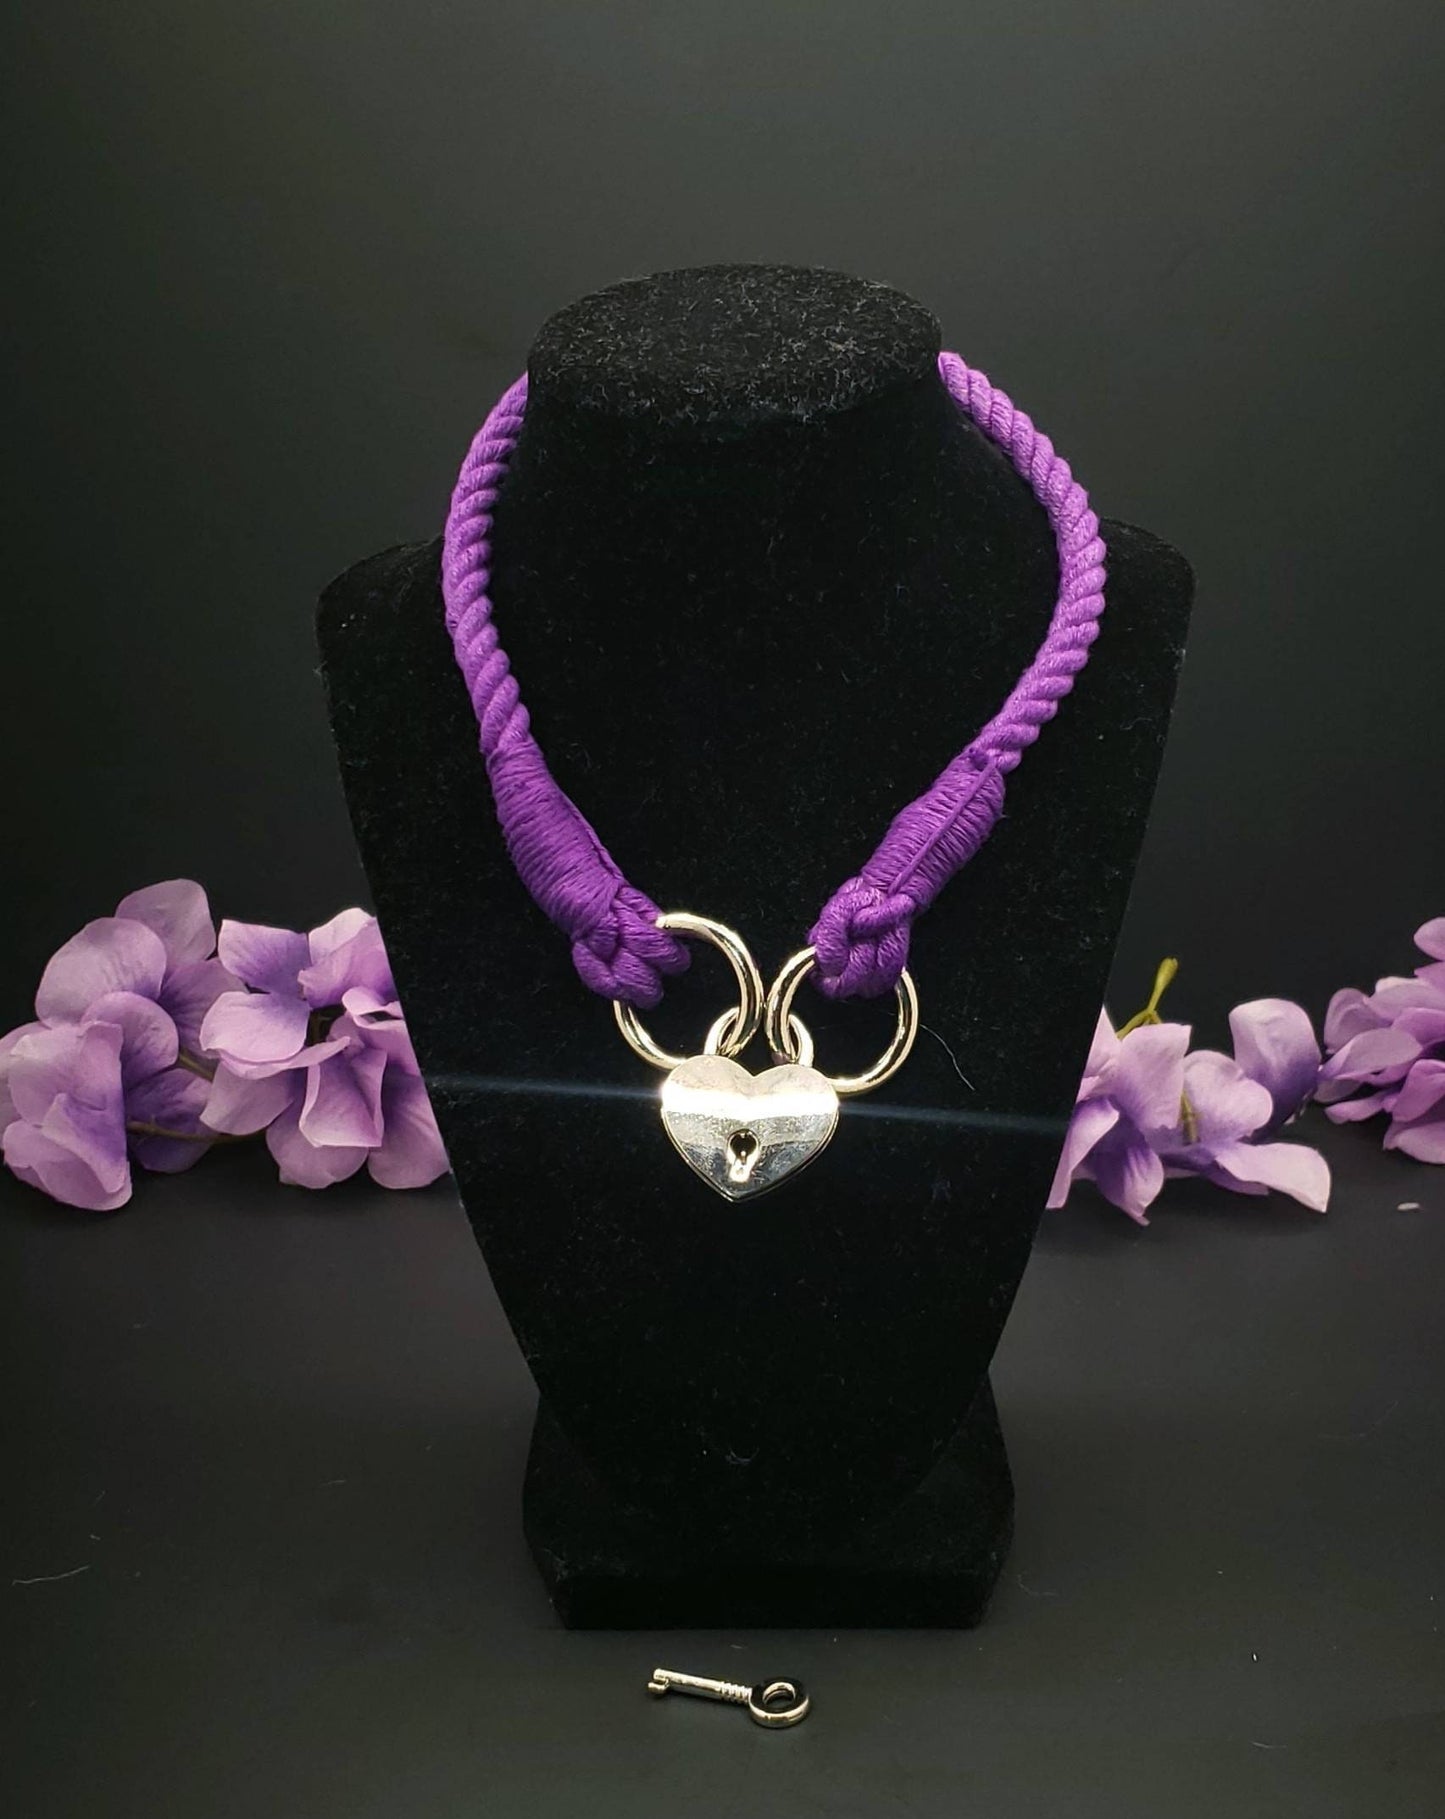 Purple Heart Locking Collar - BDSM Rope Choker - Submissive Cotton Collar | Novelty Choker Accessory for Roleplay